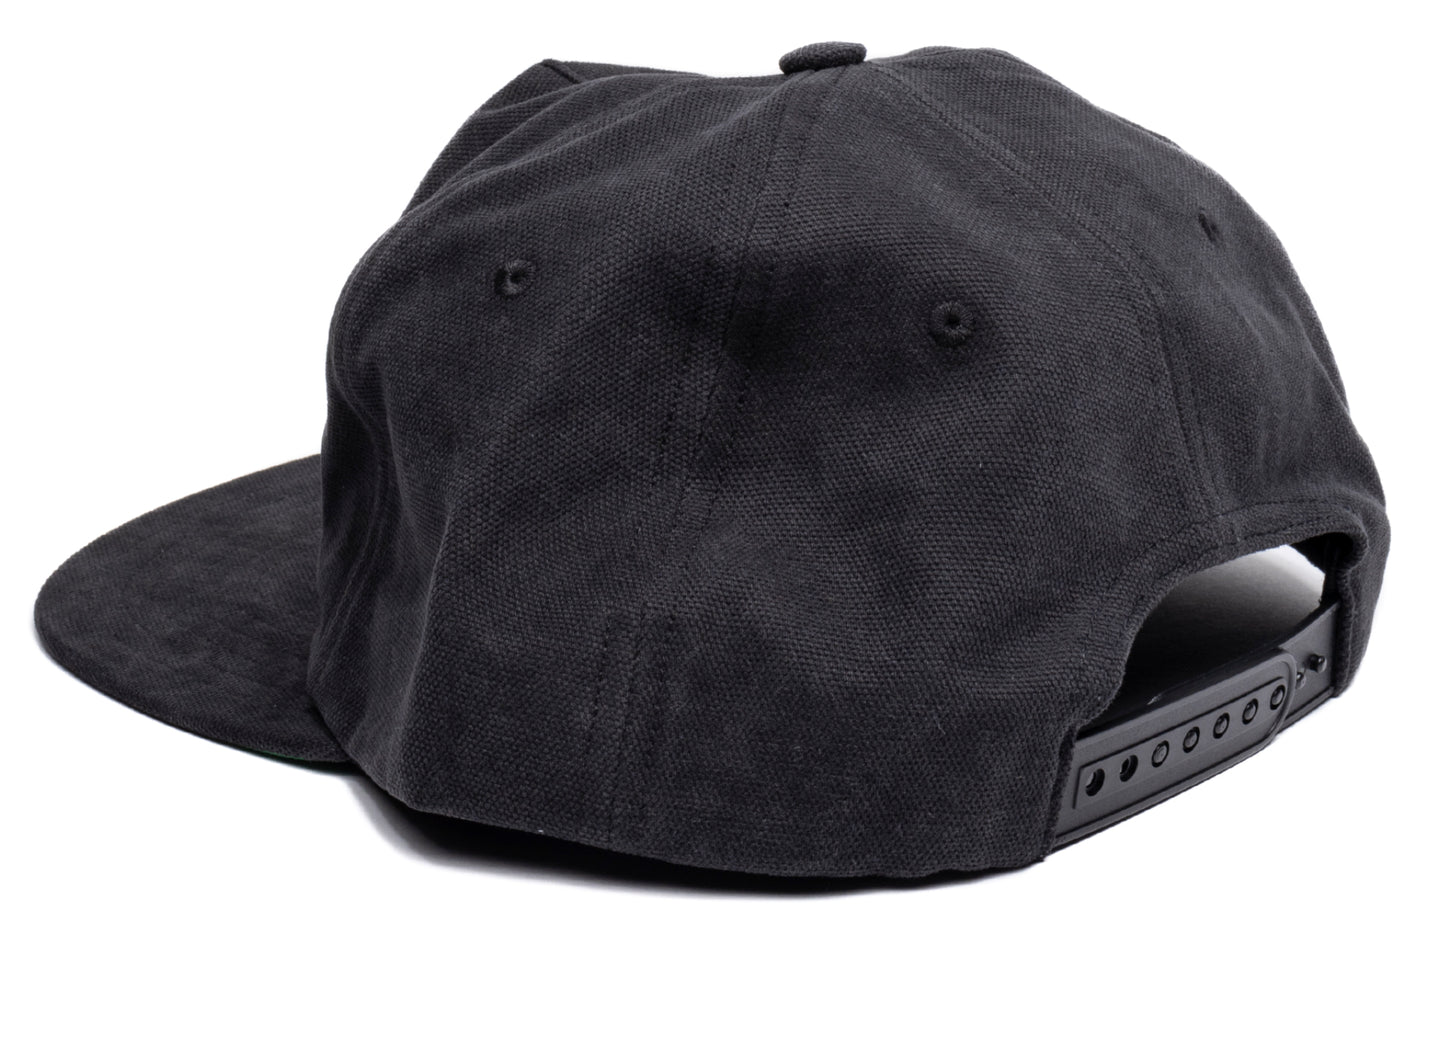 Rhude Off Road Washed Canvas Hat